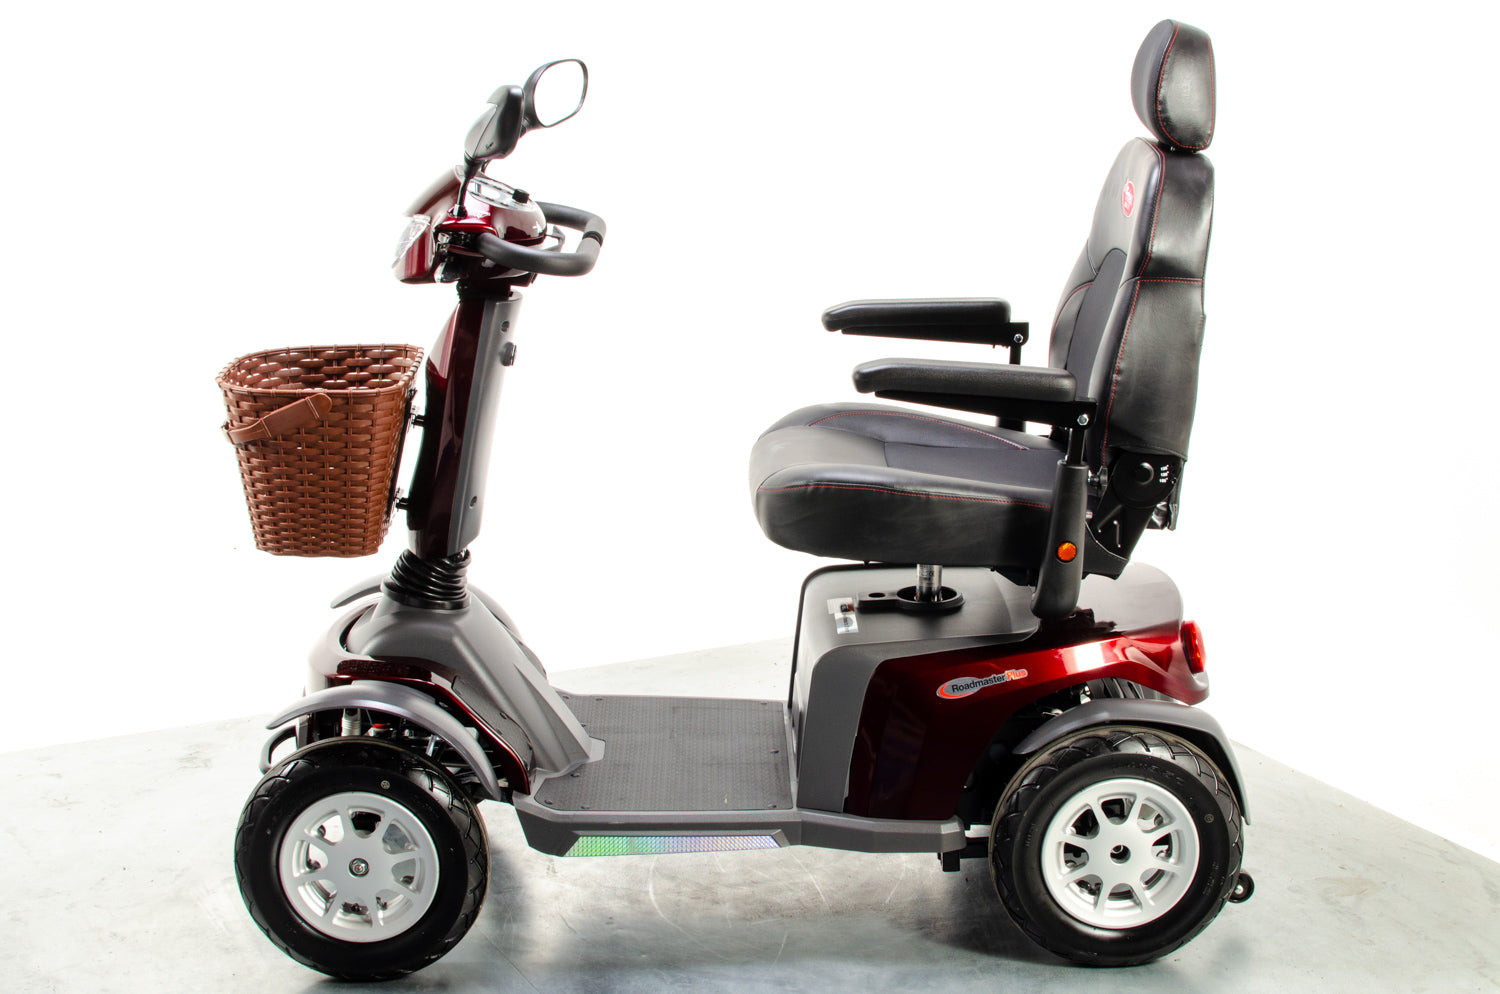 2020 Eden Roadmaster Plus Used Mobility Scooter 8mph Large All Terrain Luxury Electric